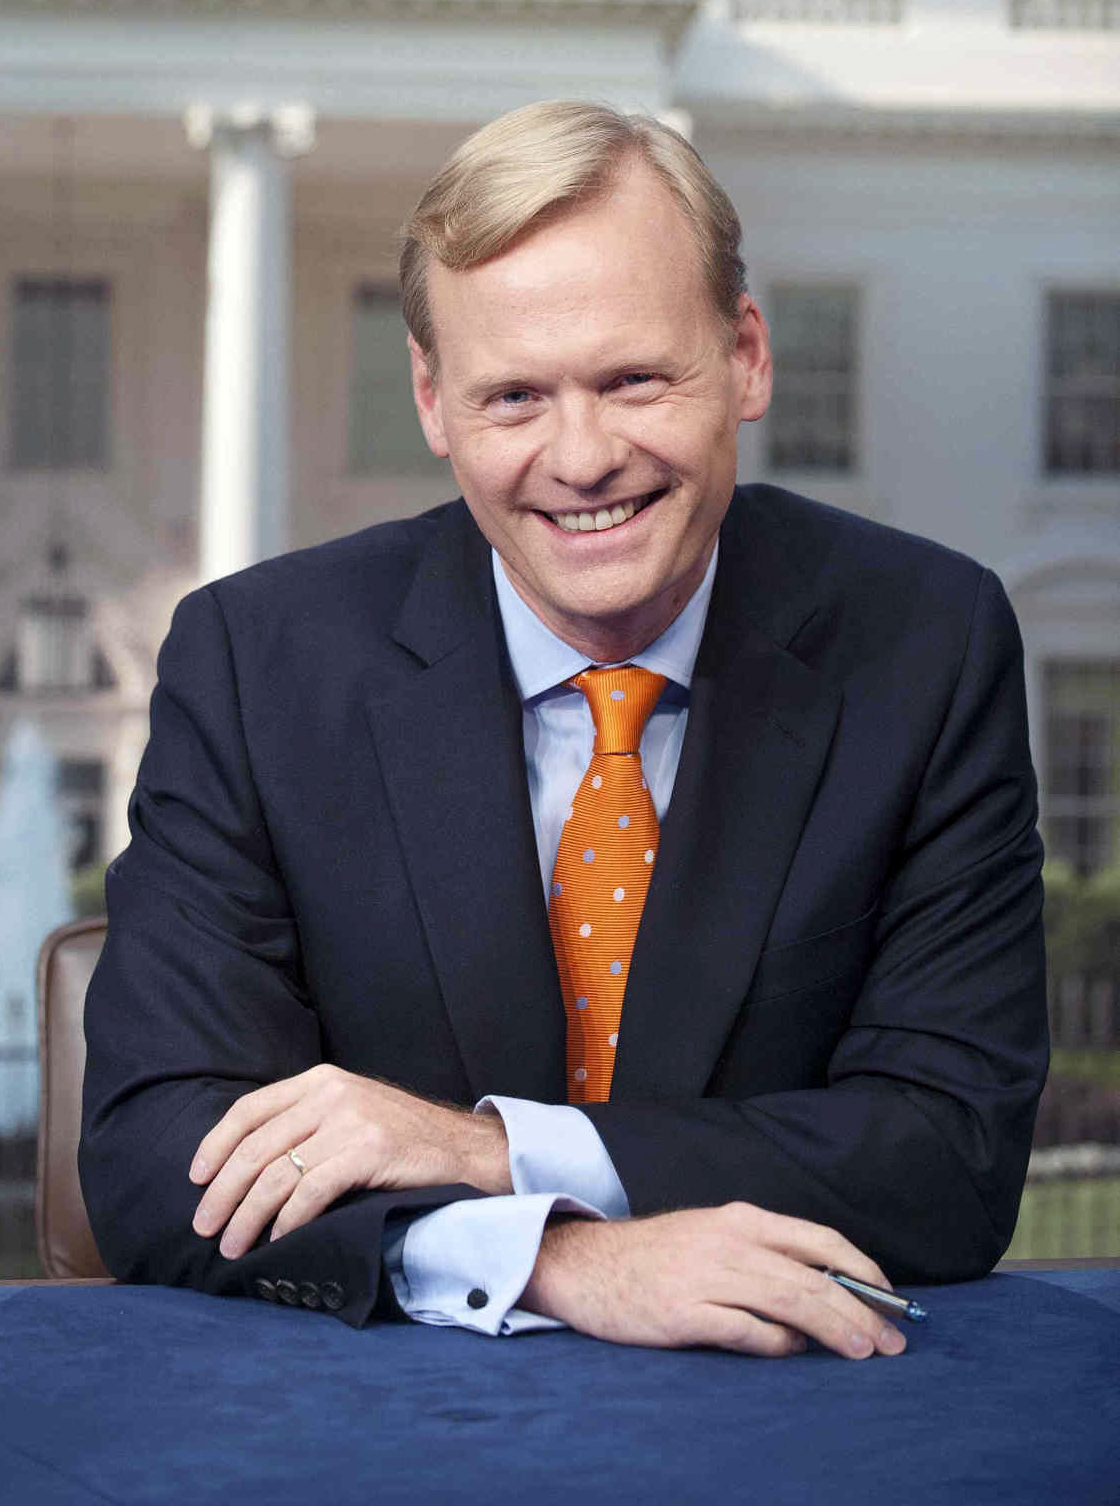 This 2012 photo provided by CBS News shows CBS News political director John Dickerson, in Washington. Dickerson will replace the retiring Bob Schieffer as moderator of "Face the Nation," Schieffer announced Sunday, April 12, 2015 (Chris Usher—AP)